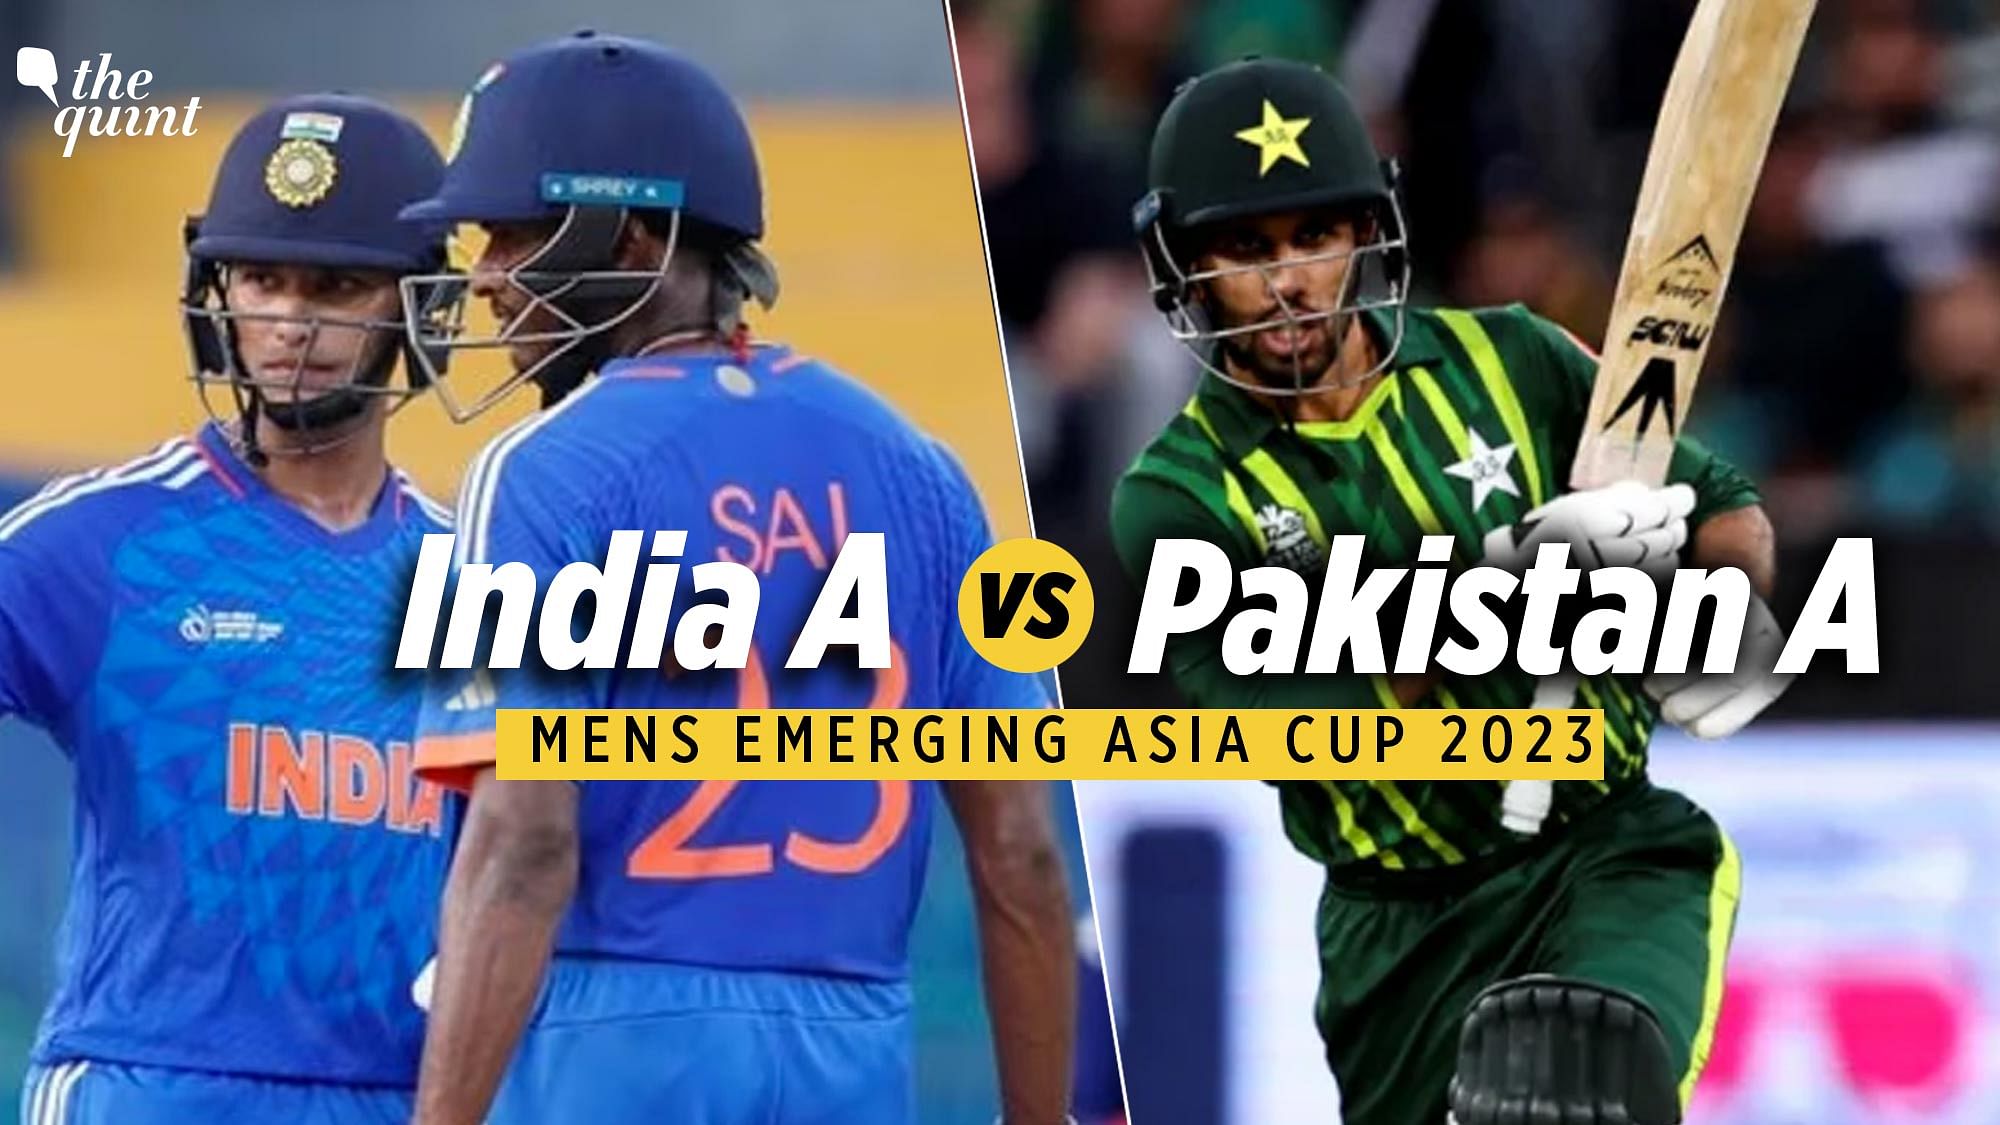 Pakistan A vs India A Mens Emerging Asia Cup 2023 Where To Watch Live Streaming and Telecast Date, Time, Venue, and Other Details